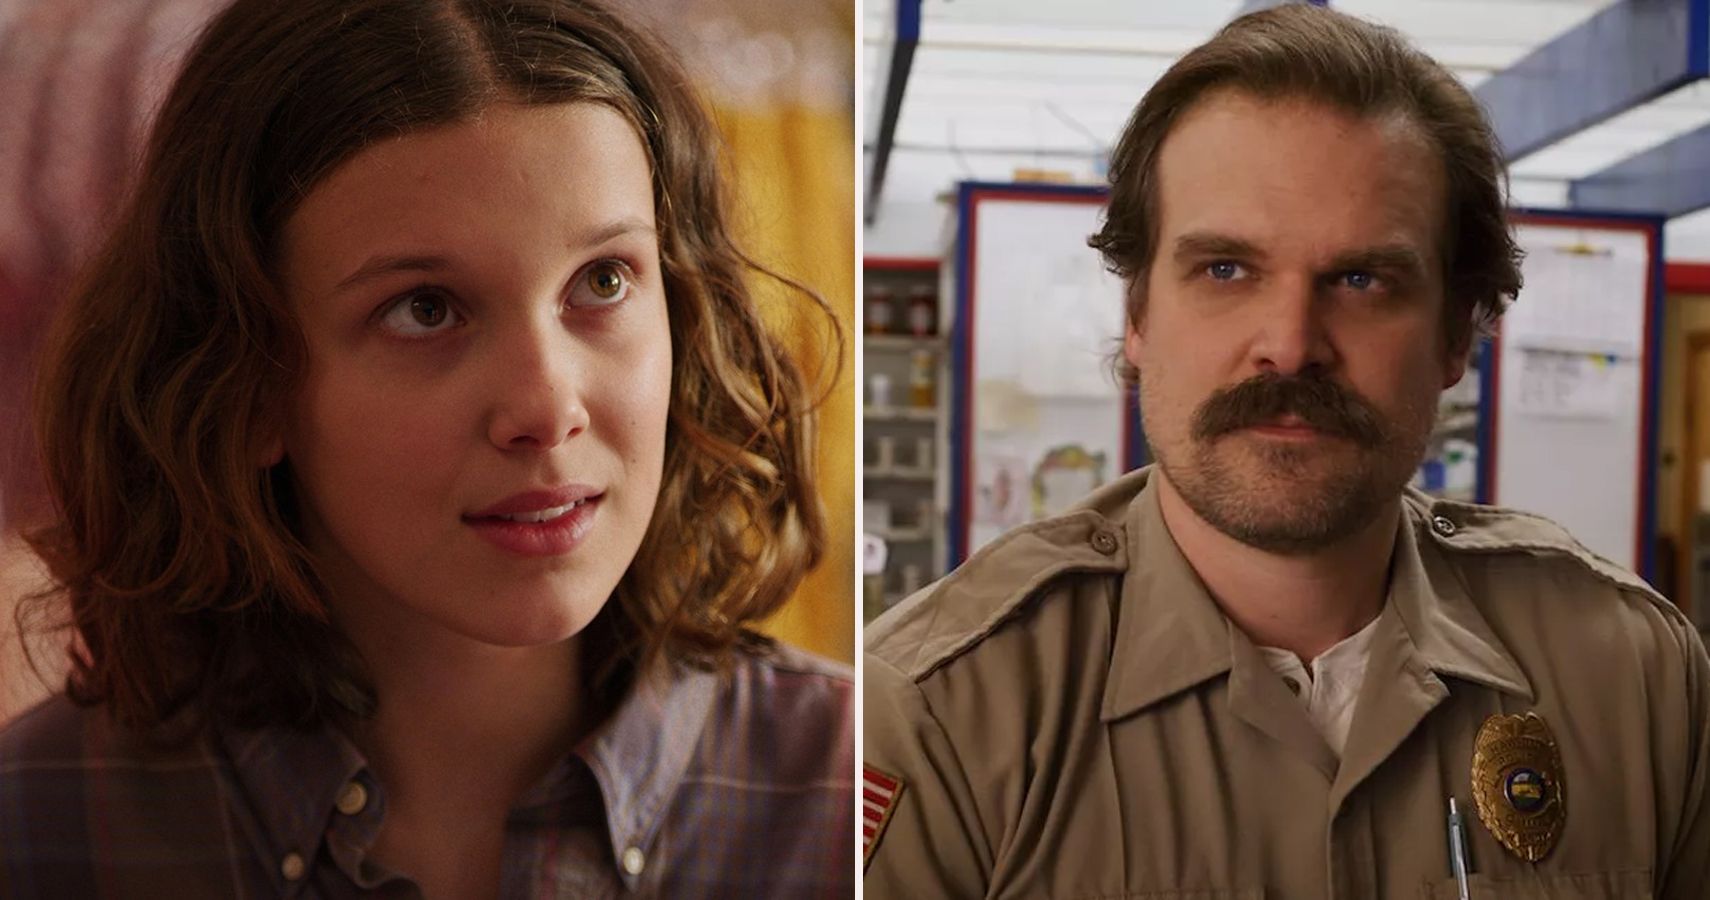 Stranger Things Season 3 review: “Faster, bigger, sillier, and